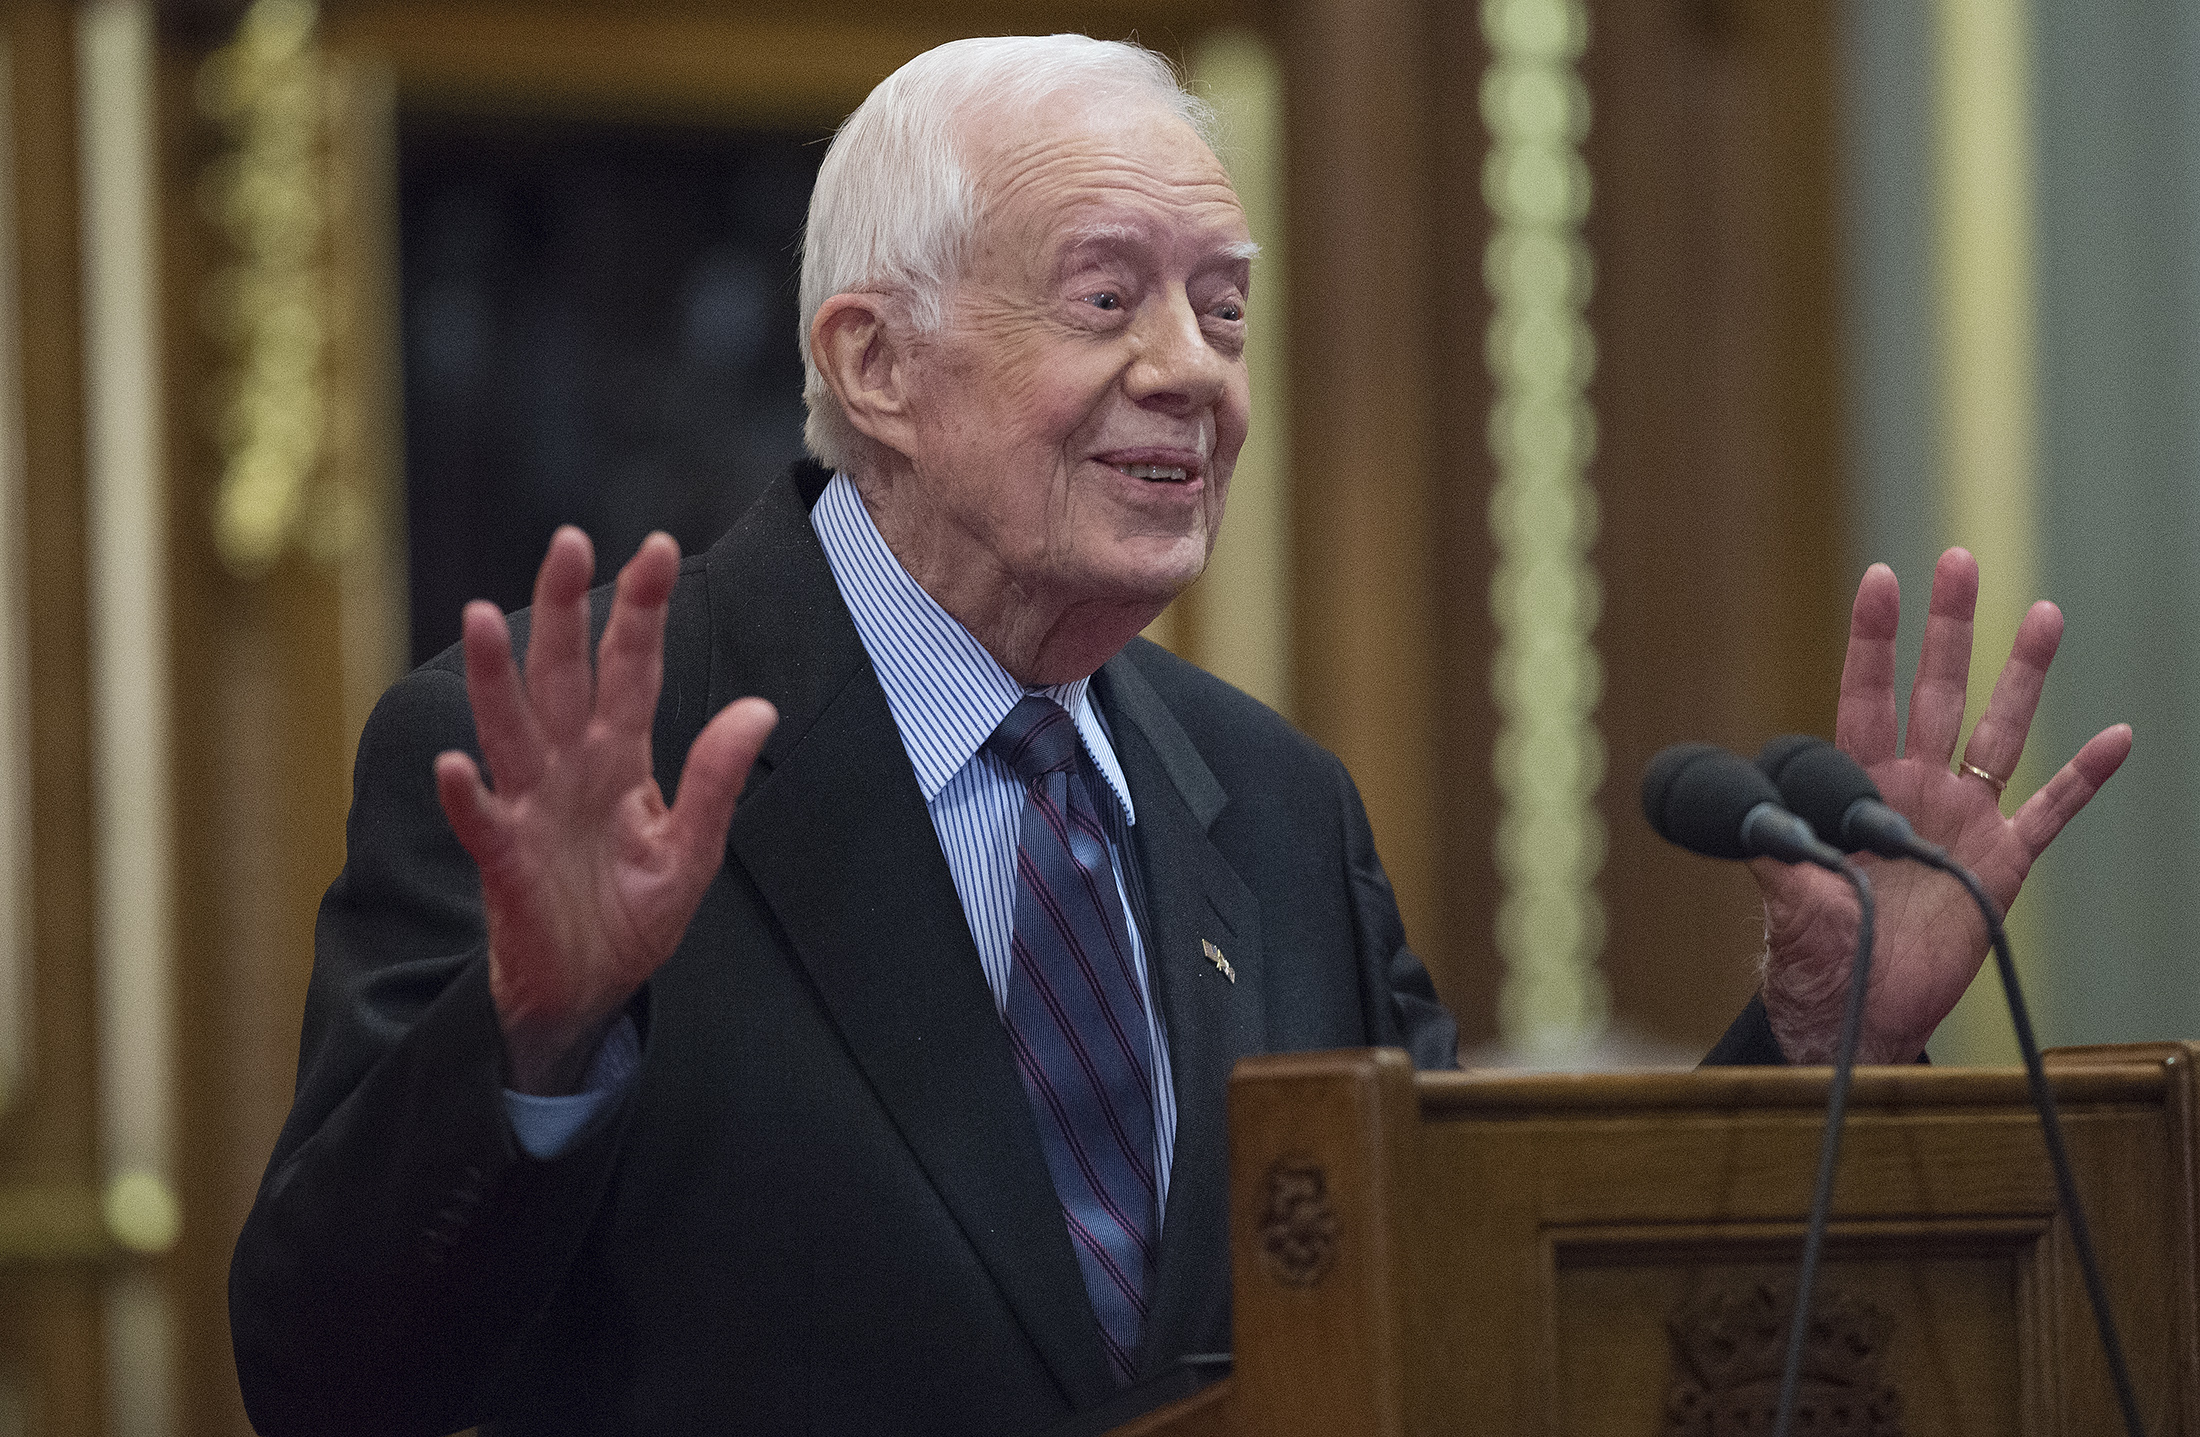 Former US President Jimmy Carter Deliver A Lecture on Guinea Worm Eradication